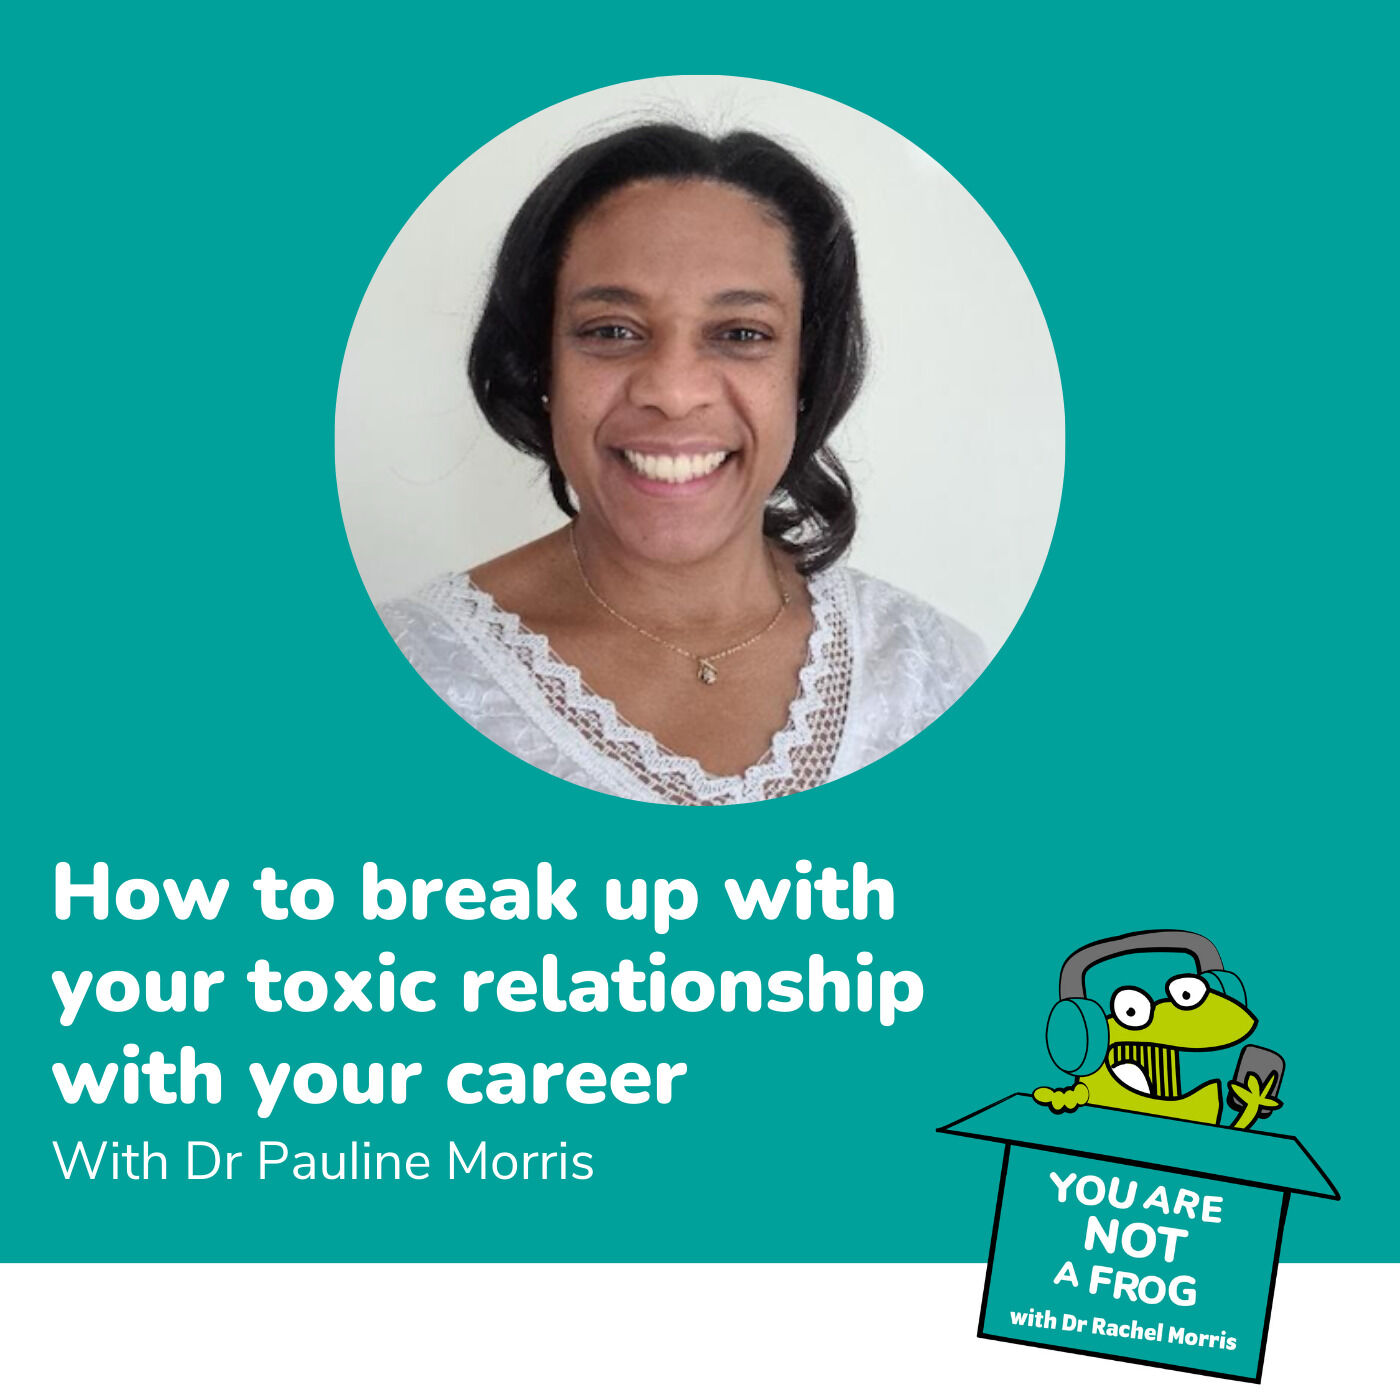 How to Break Up With Your Toxic Relationship With Your Career with Dr Pauline Morris